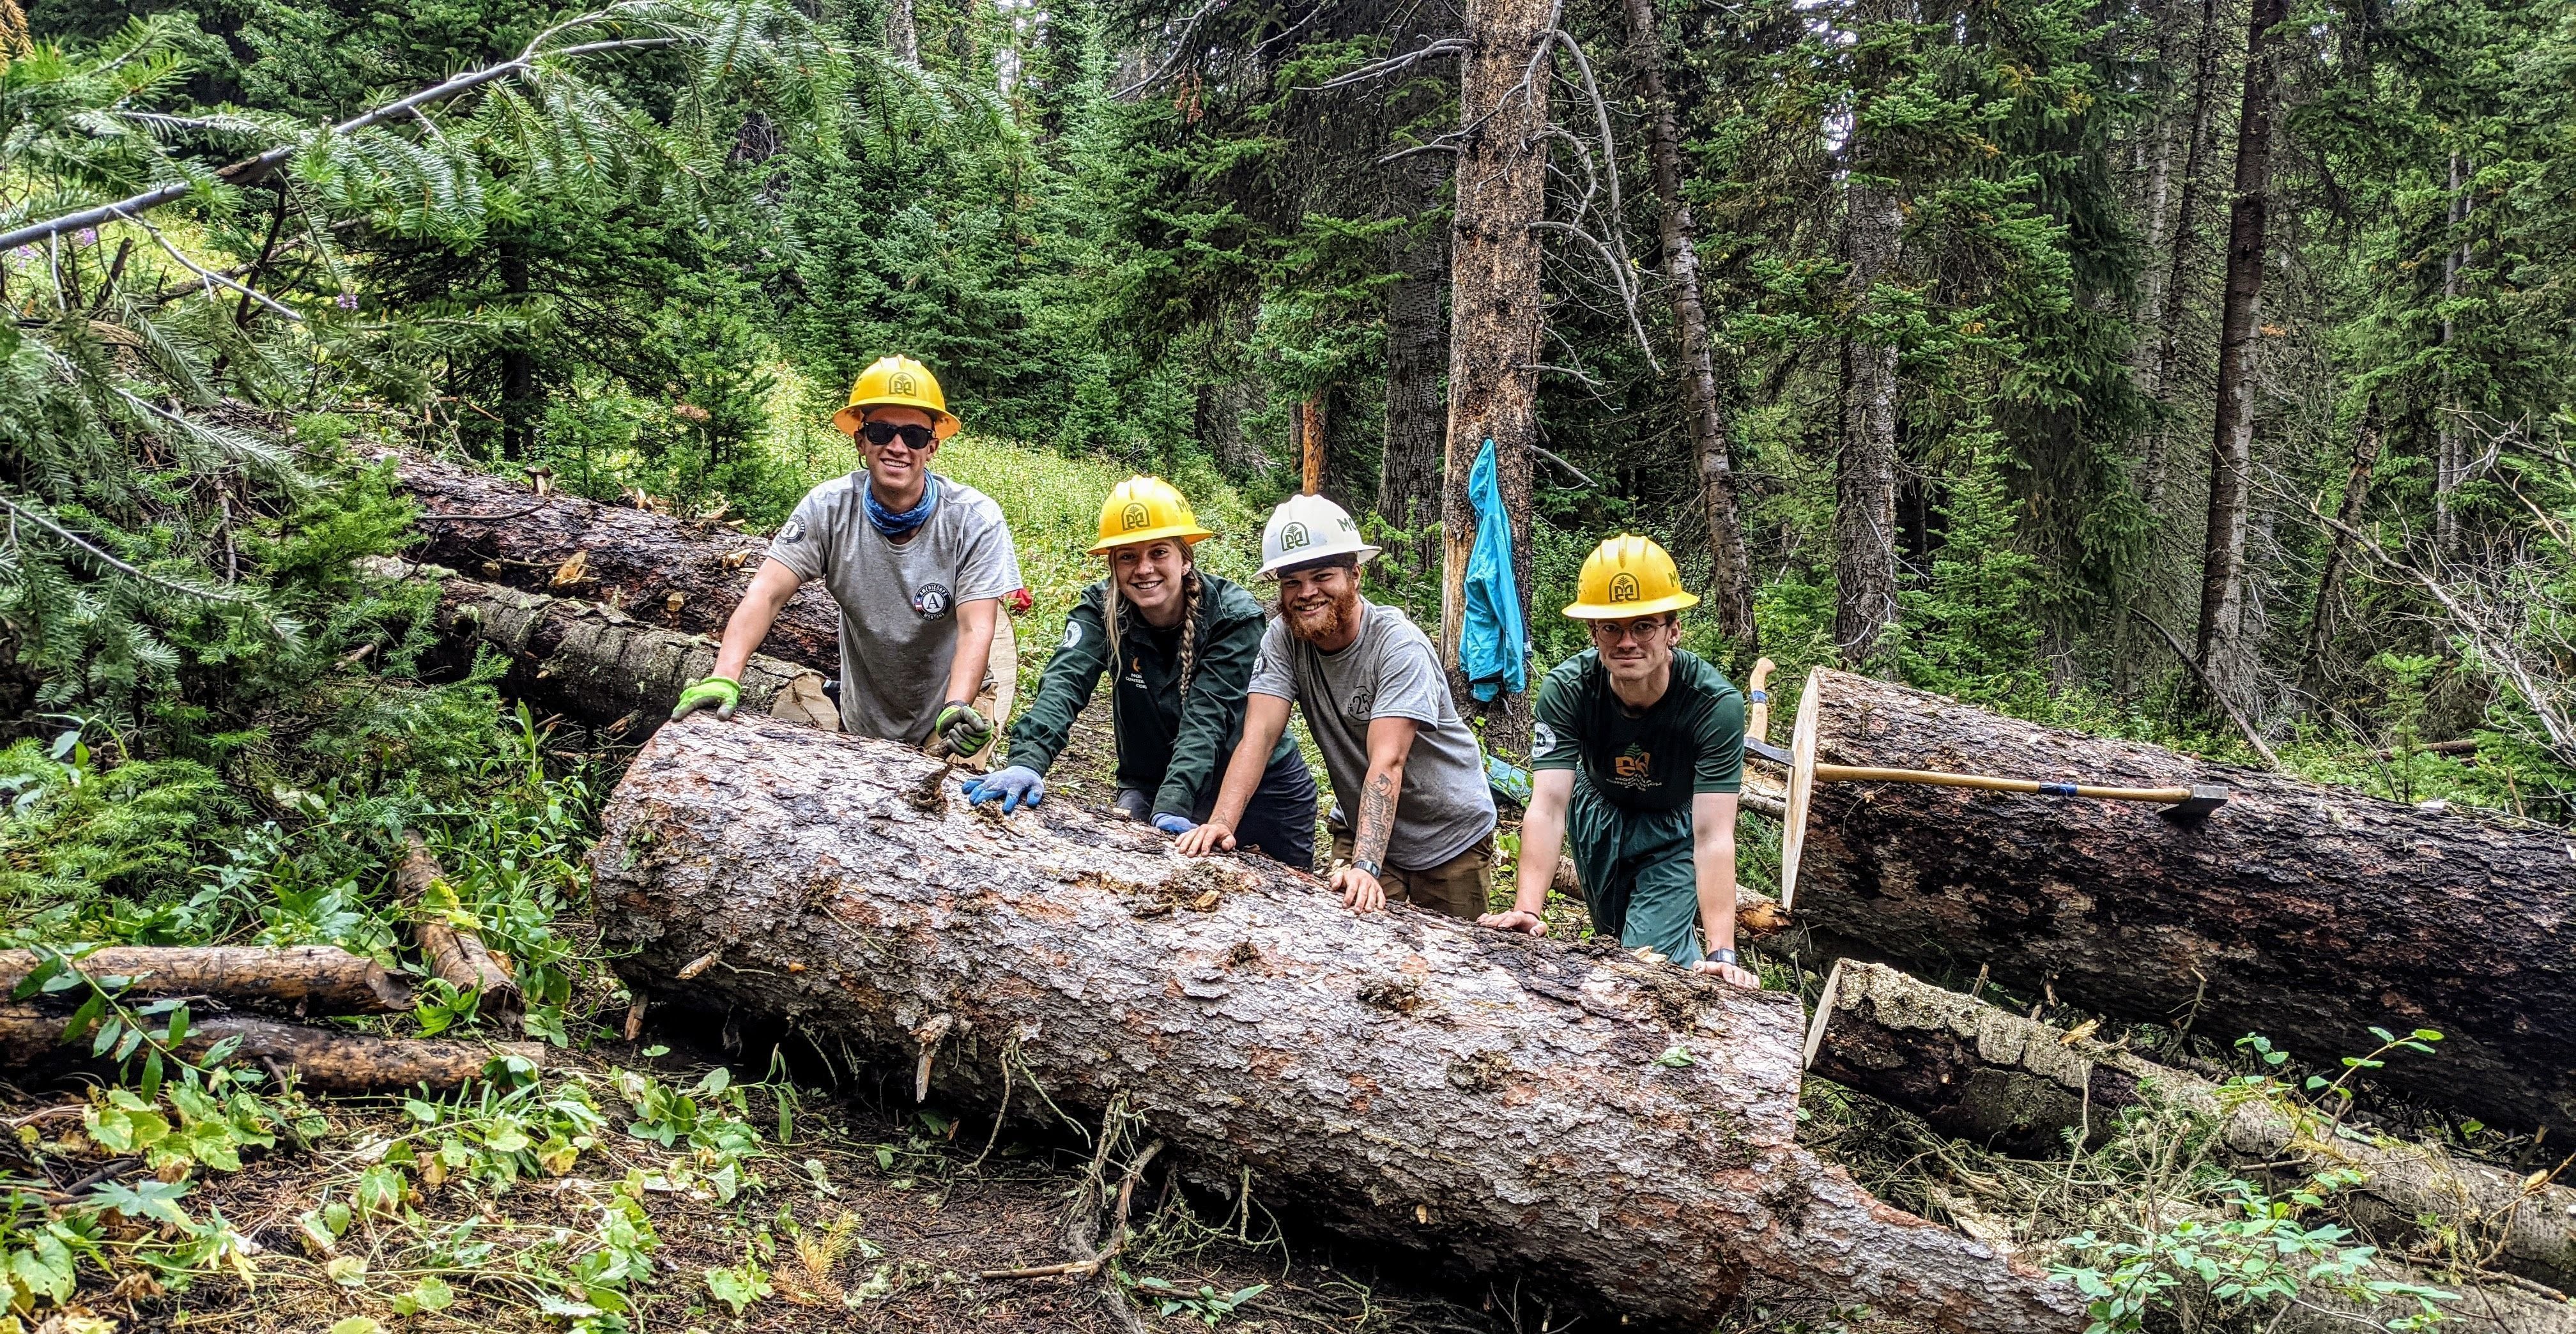 [Image Description: Four MCC members, smiling at the camera, are working together to roll a massive log that they just cut off the trail. They are all wearing their MCC uniforms and hard hats, surrounded by a dense forest.]